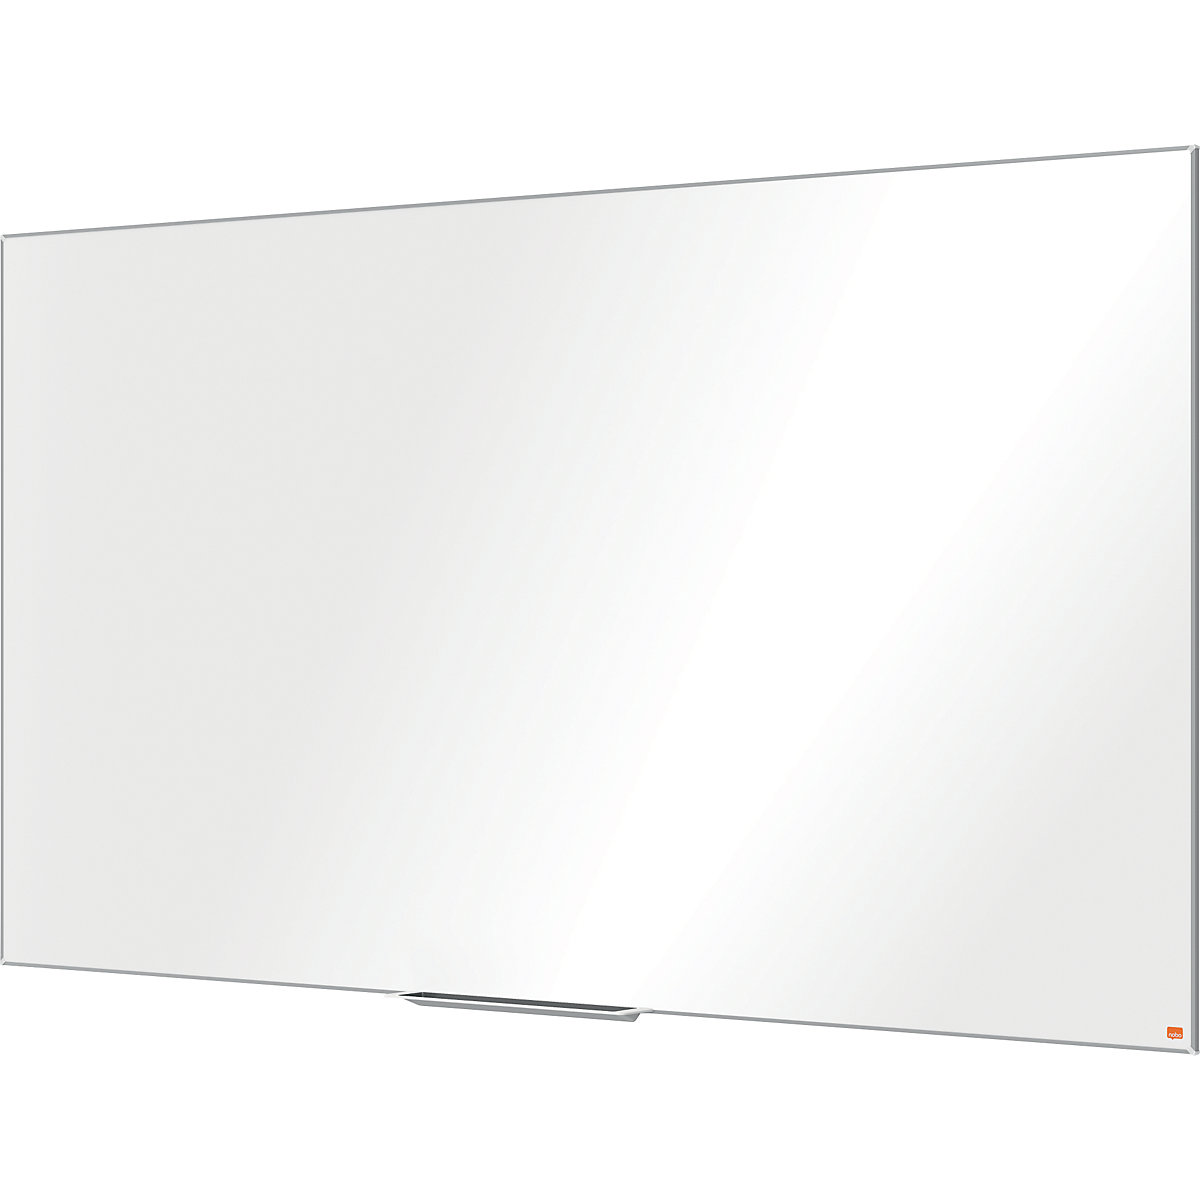 Whiteboard PRO nobo, Widescreen-Format, Stahl emailliert, 85'', BxH 1887 x 1064 mm-6